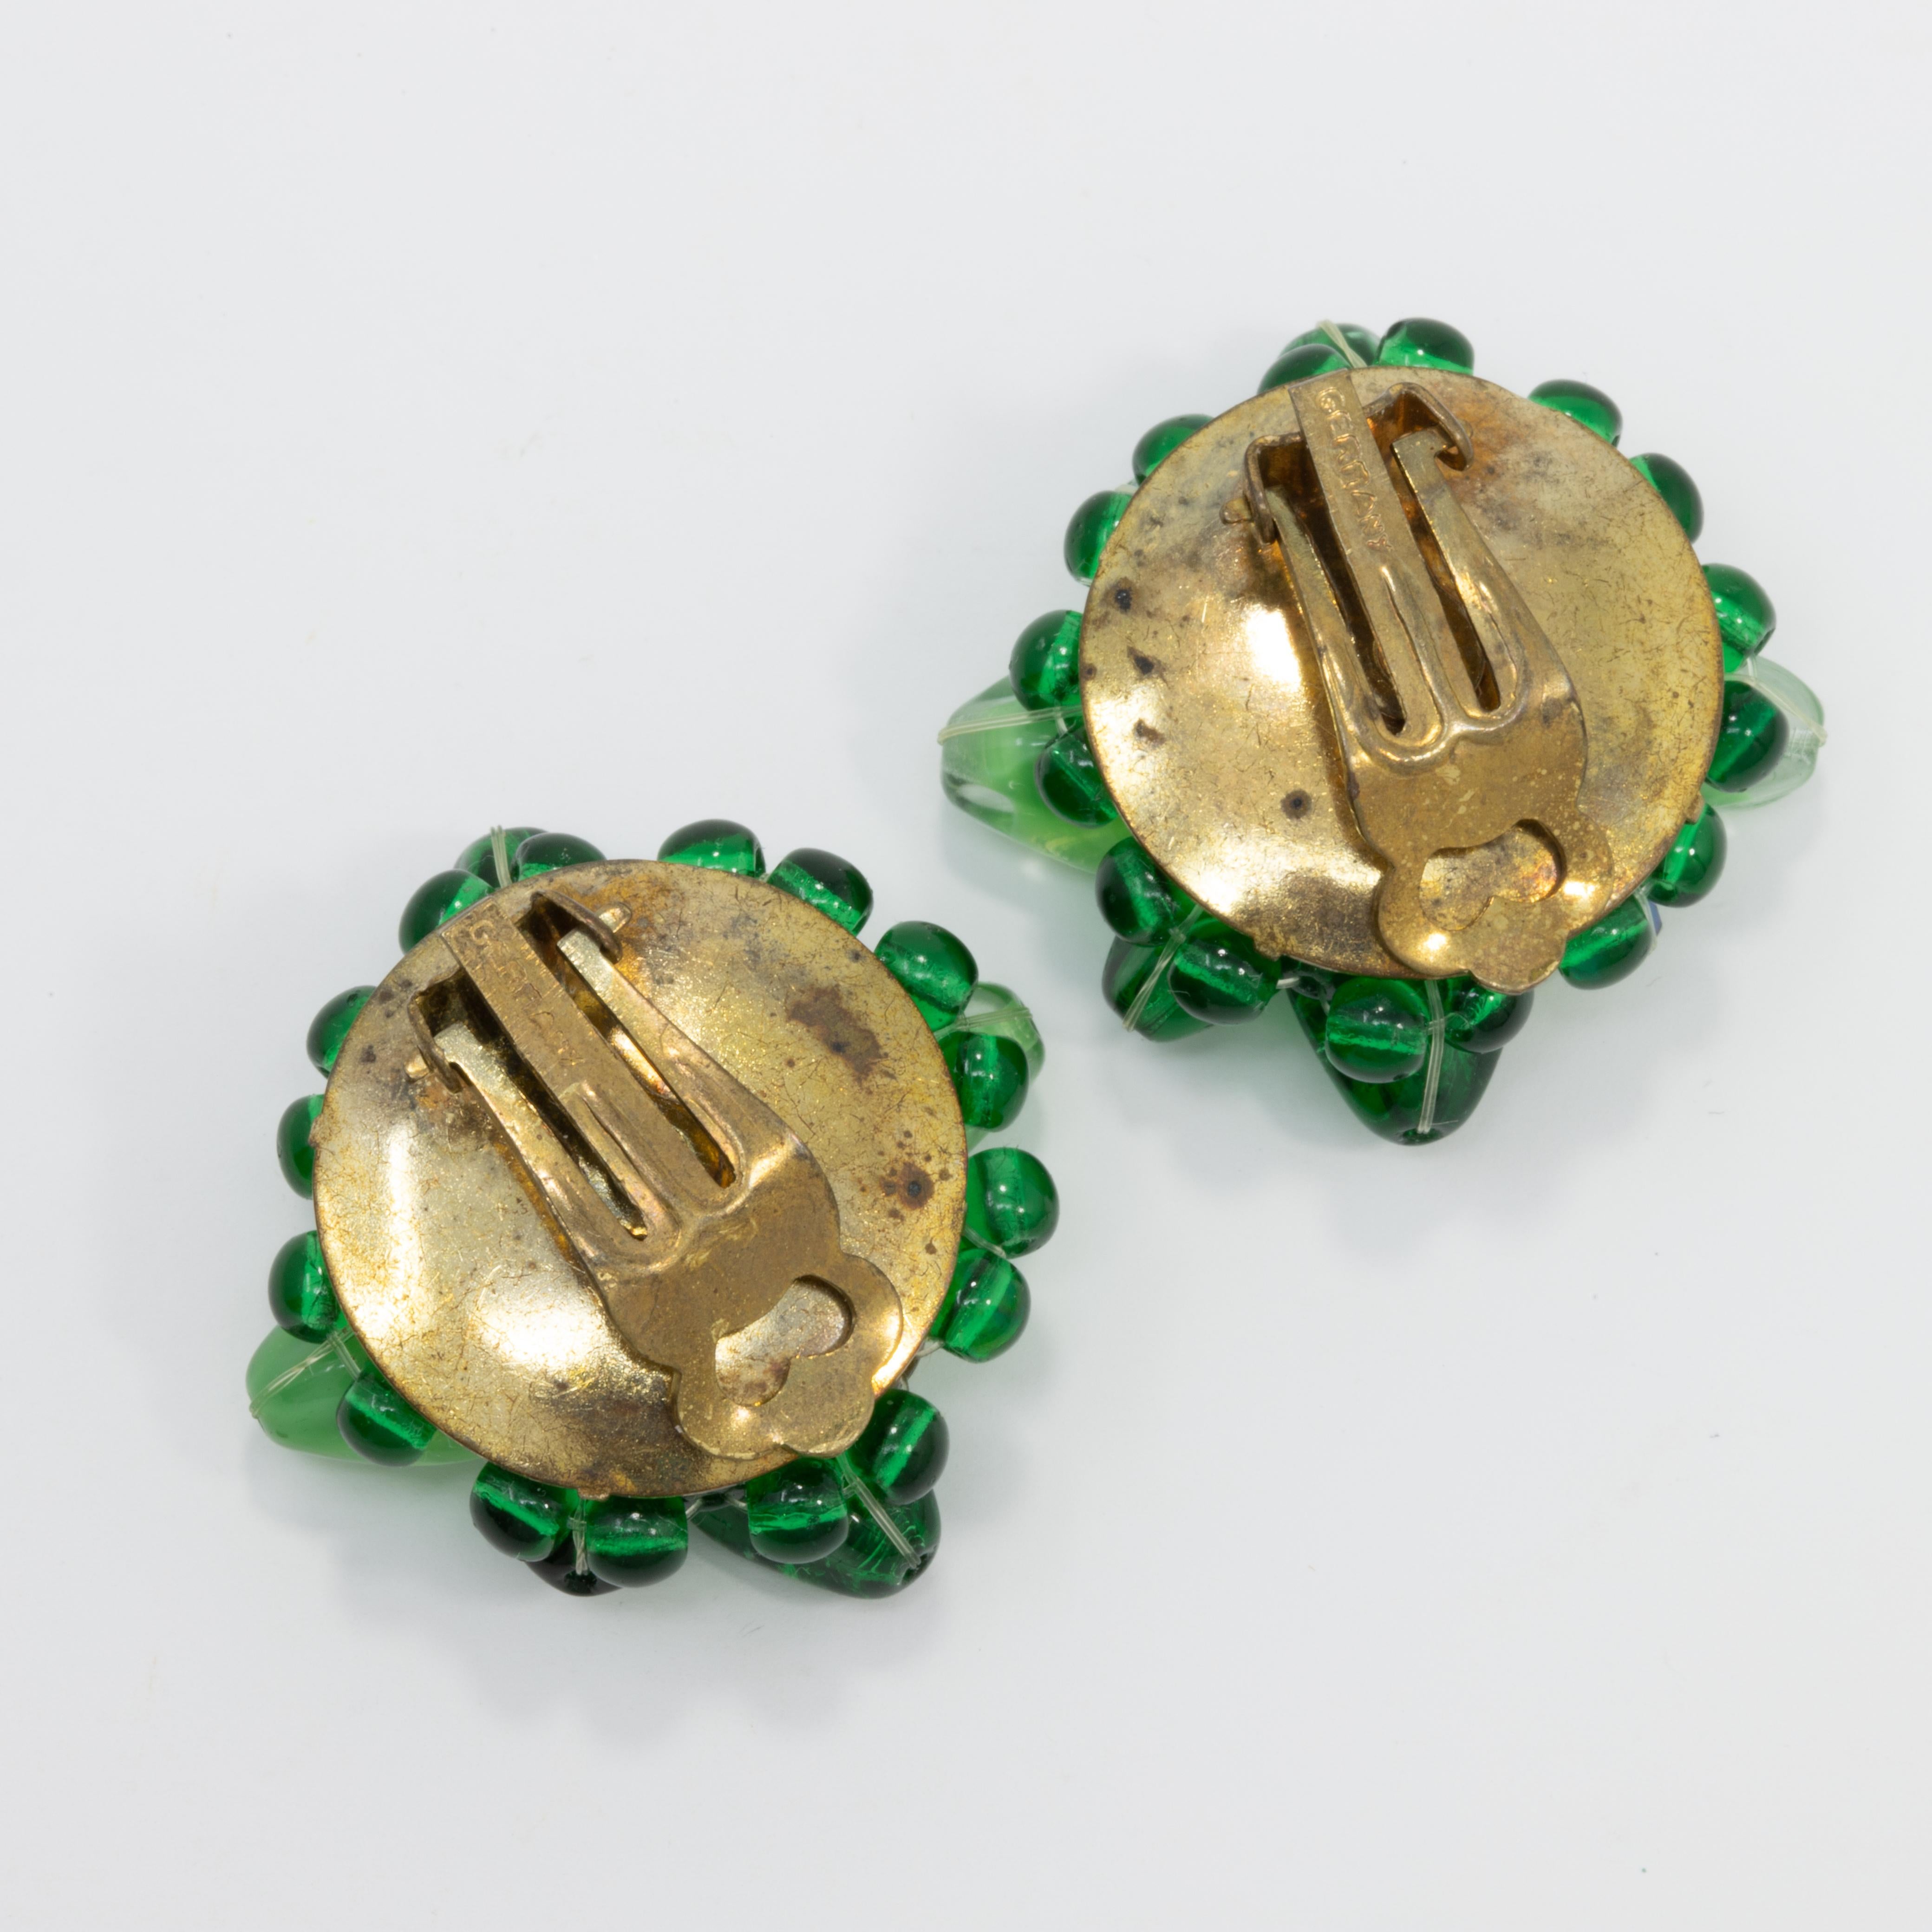 Pair of vintage clip on Coro earrings, each featuring emerald and peridot crystals and a single green faux pearl. Comes with original paper label, marked 